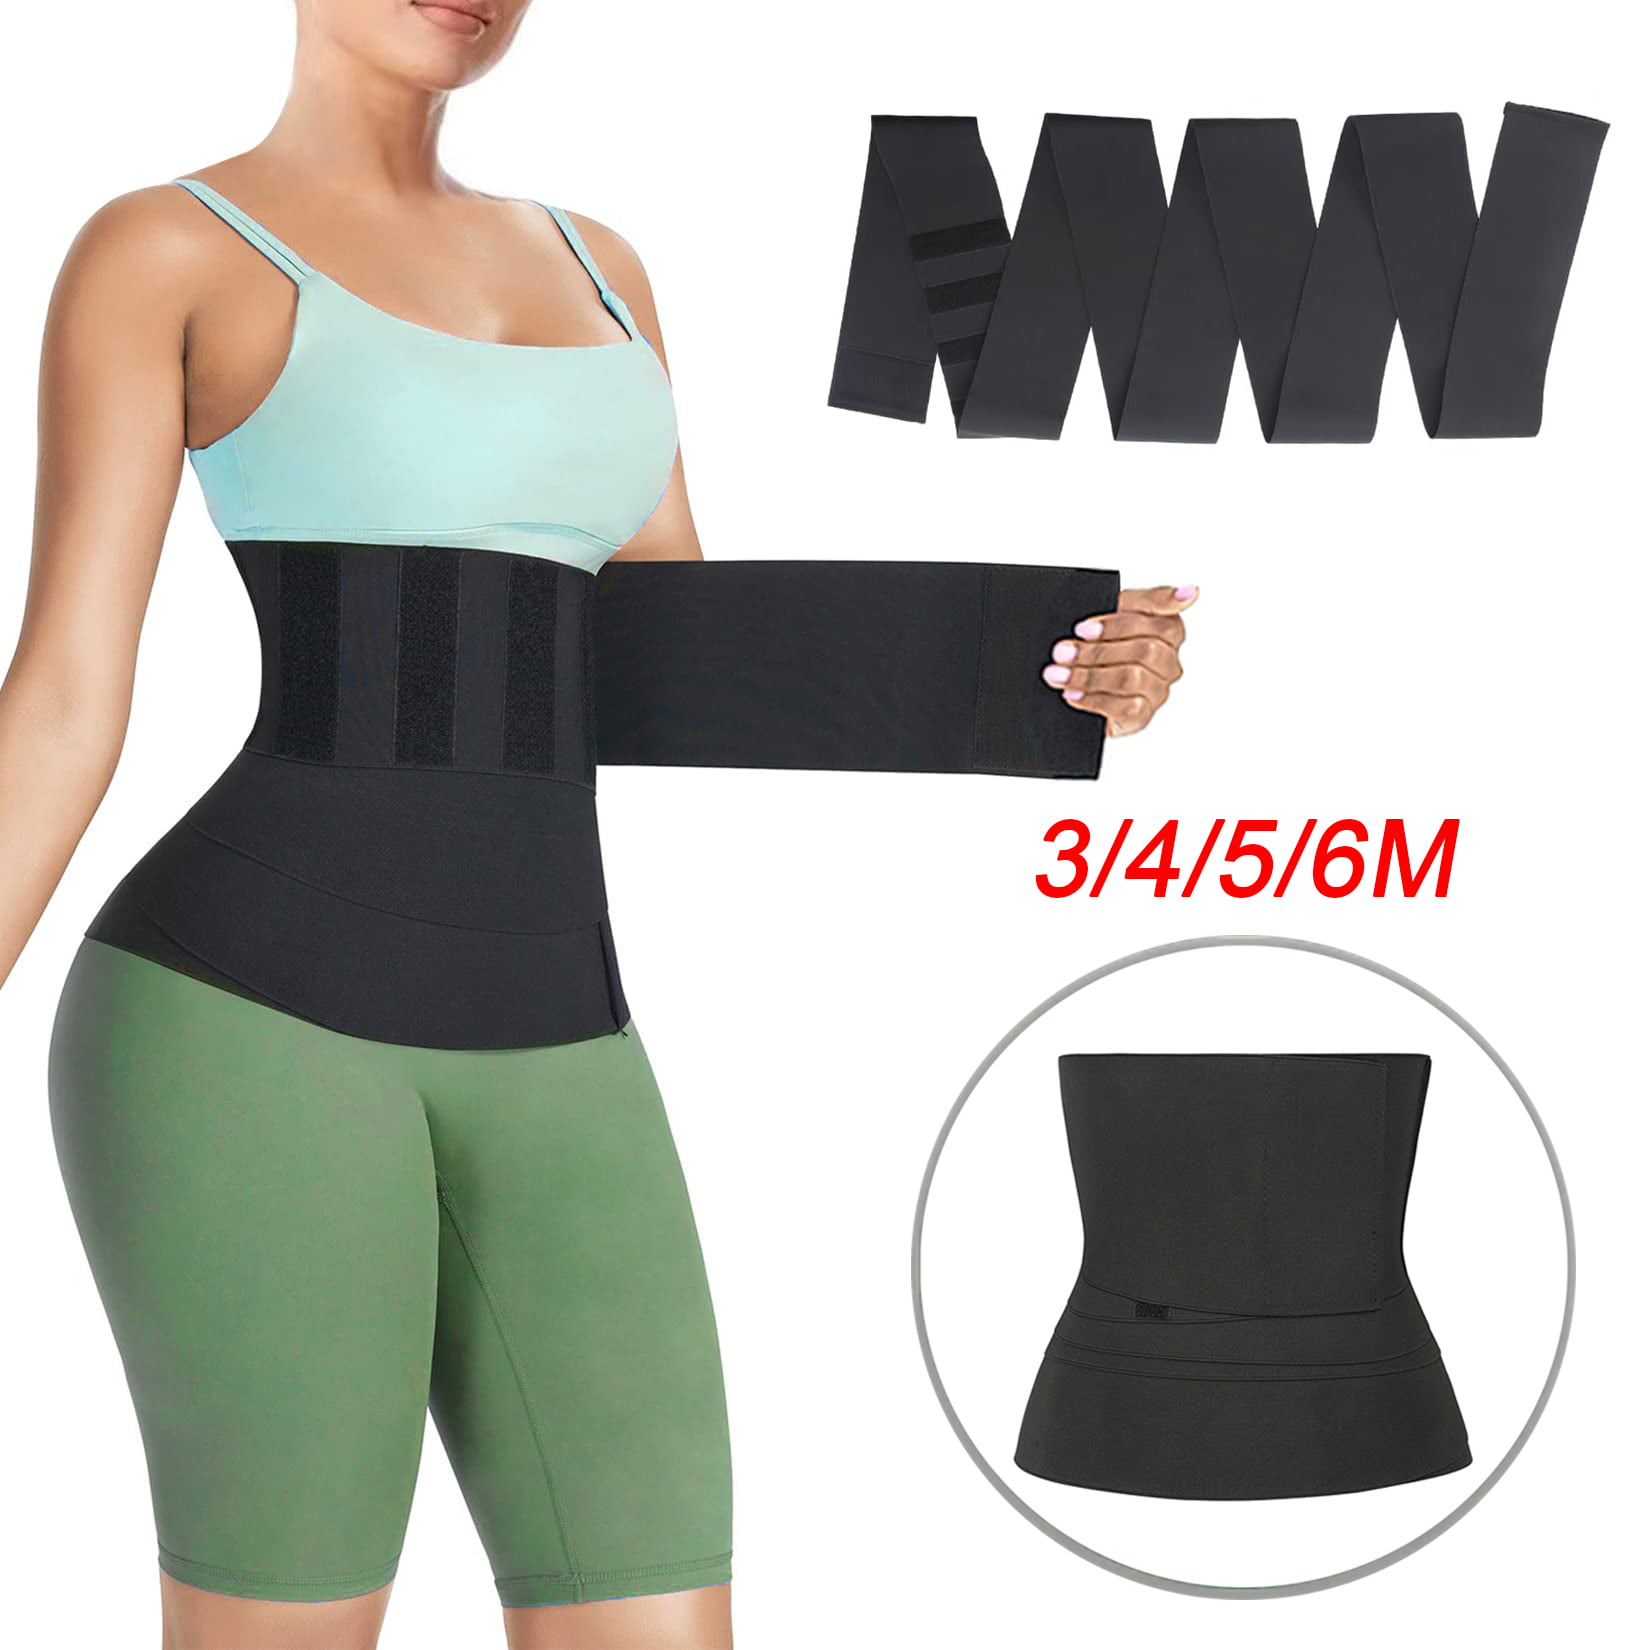 Snatch Me Up Bandage Tummy Wrap Waist Trainer Body Wraps Weight Loss Waist Trimmer for Women 